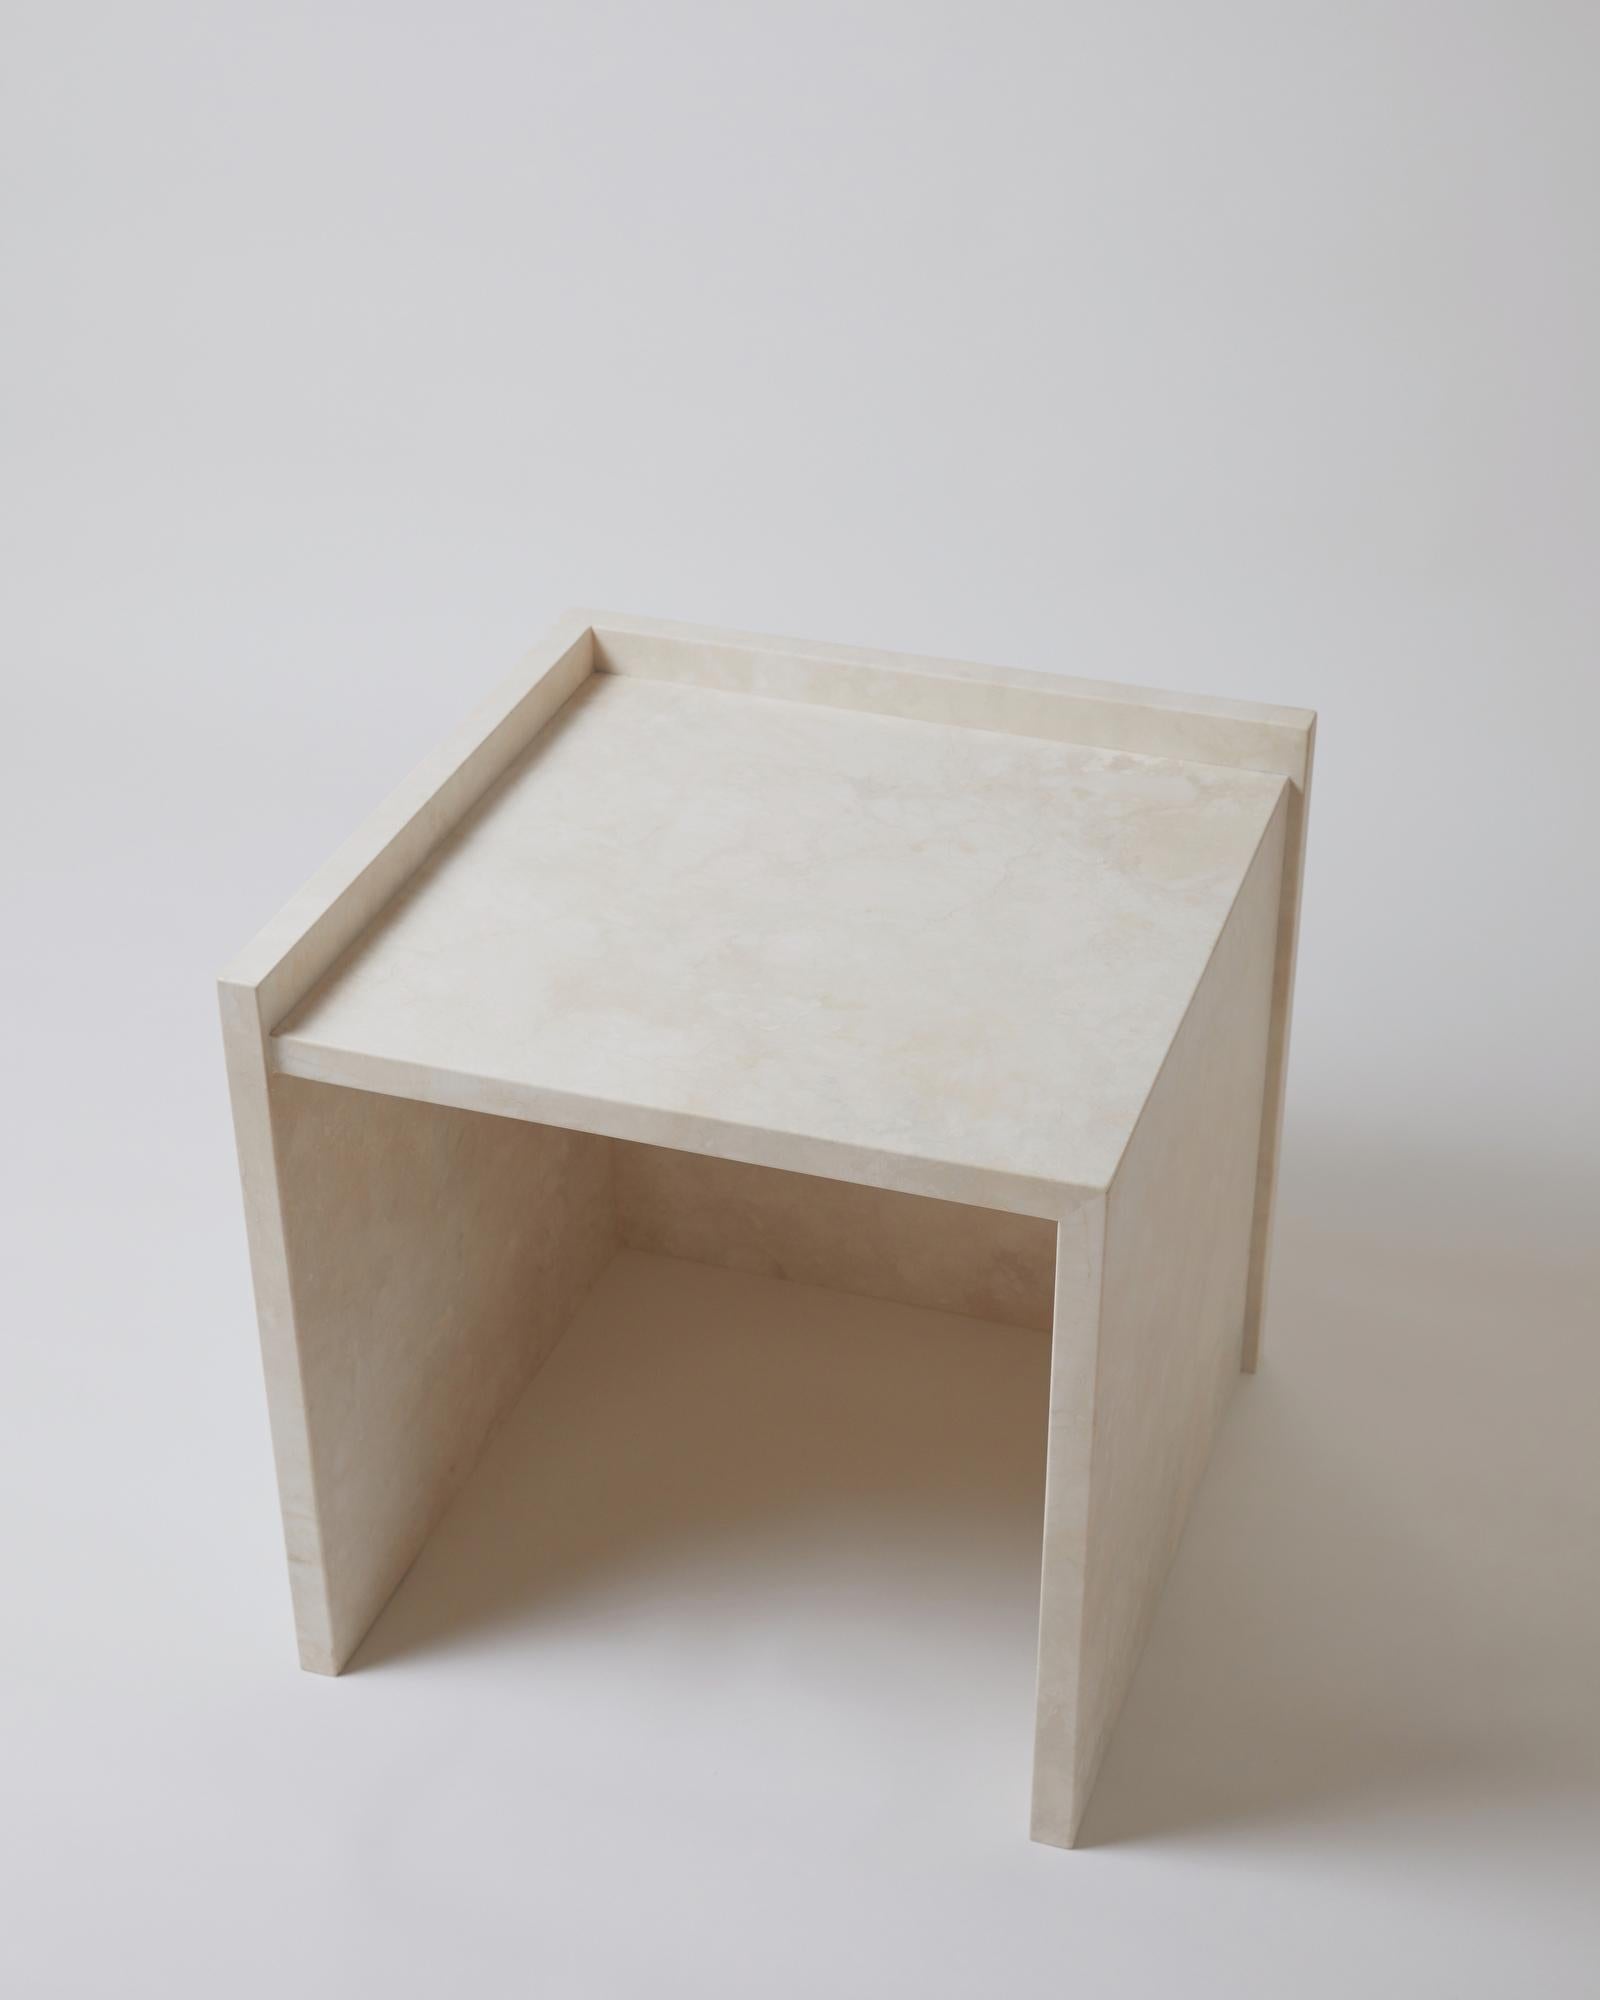 American Pure Minimalist Travertine Left Side Table by Amee Allsop, AA112.1 For Sale